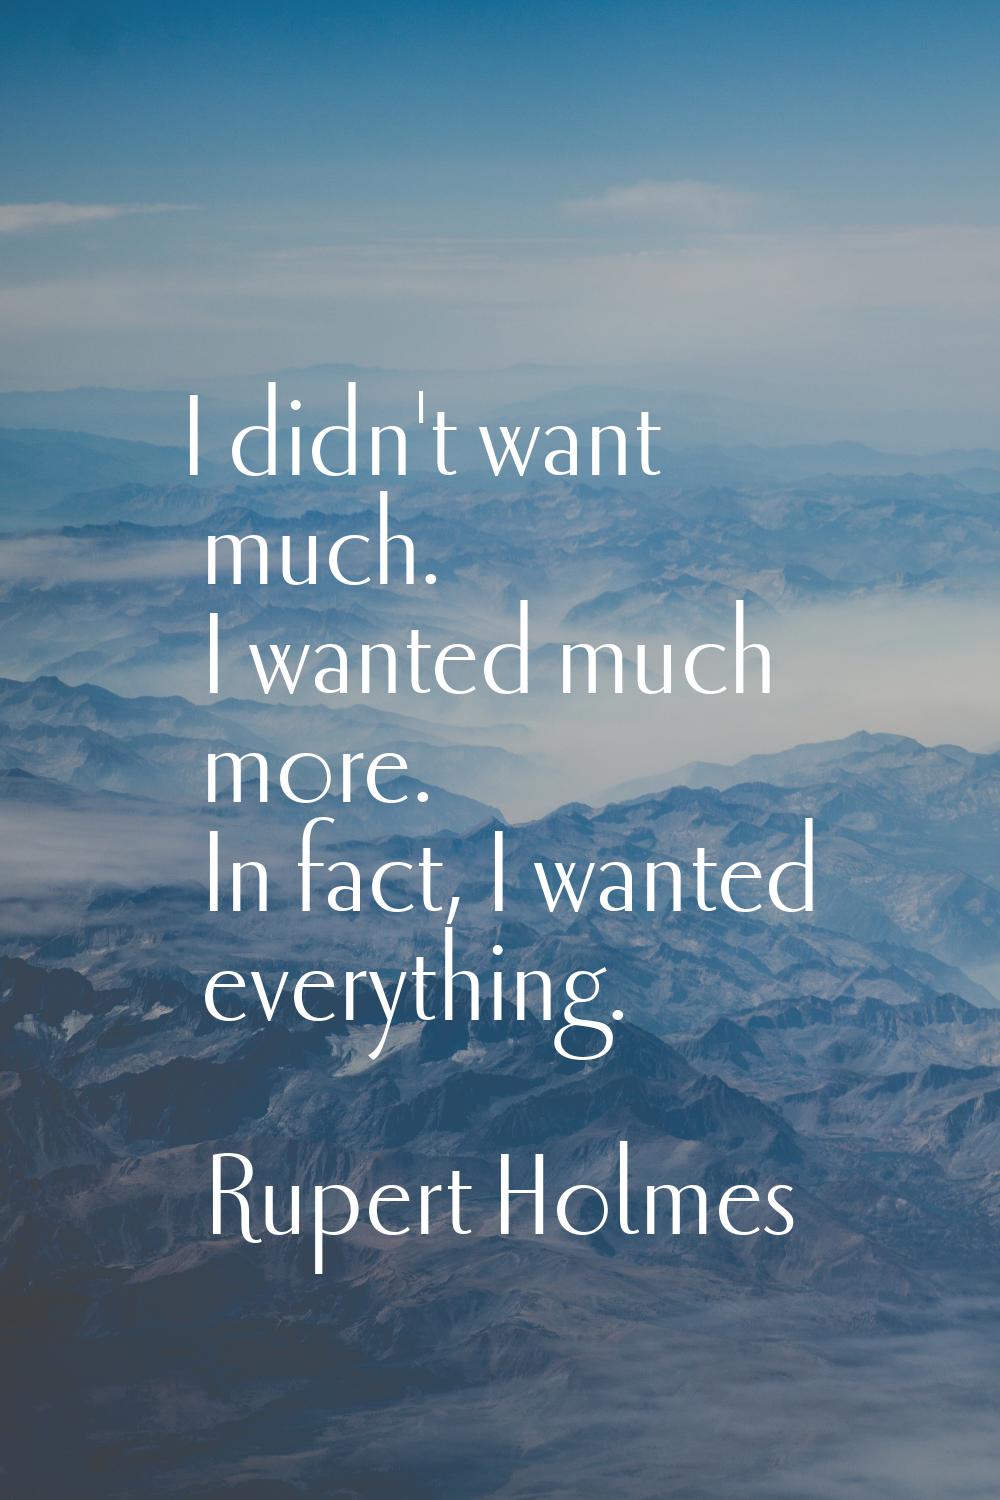 I didn't want much. I wanted much more. In fact, I wanted everything.